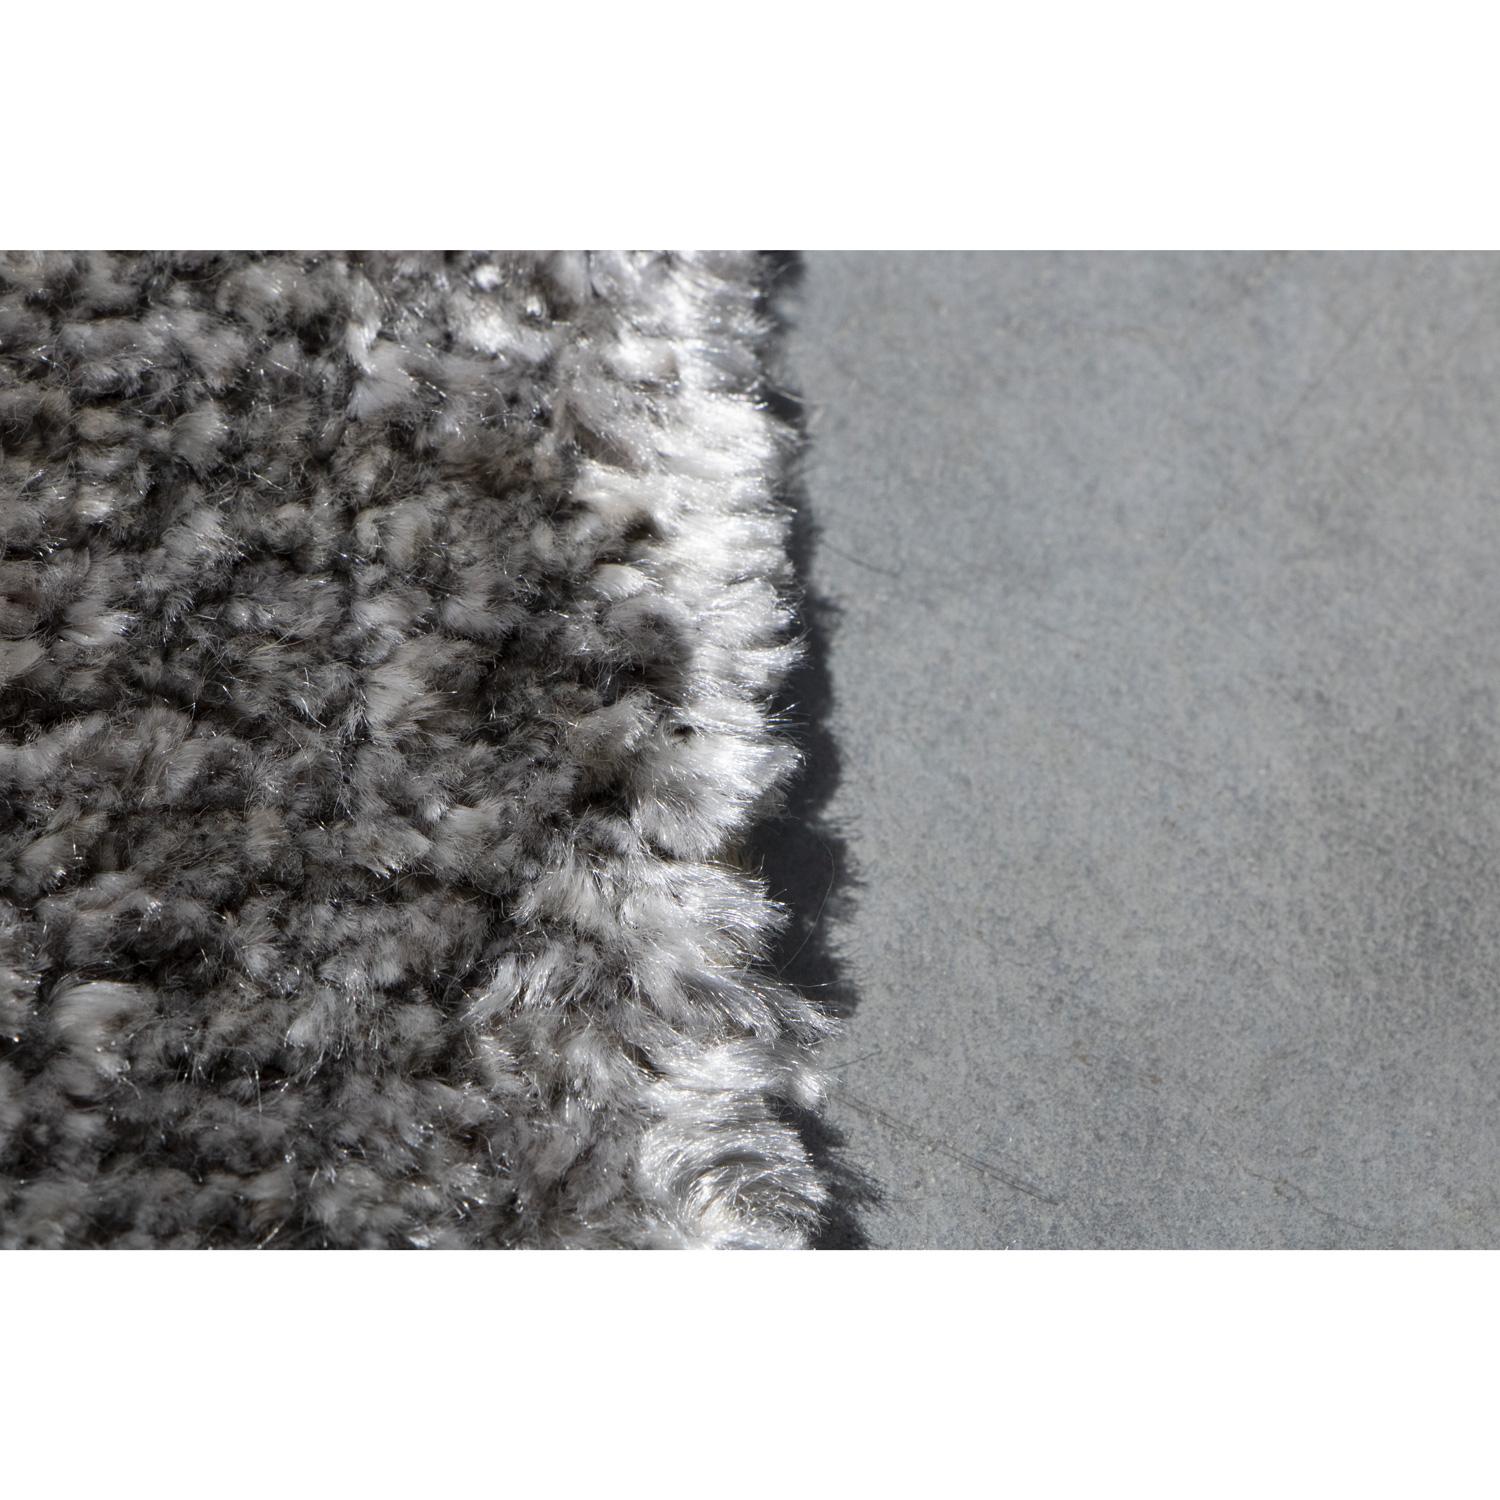 21st Cent Luxury Shiny Velvety Silvery Rug by Deanna Comellini In Stock 60x120cm In New Condition For Sale In Bologna, IT